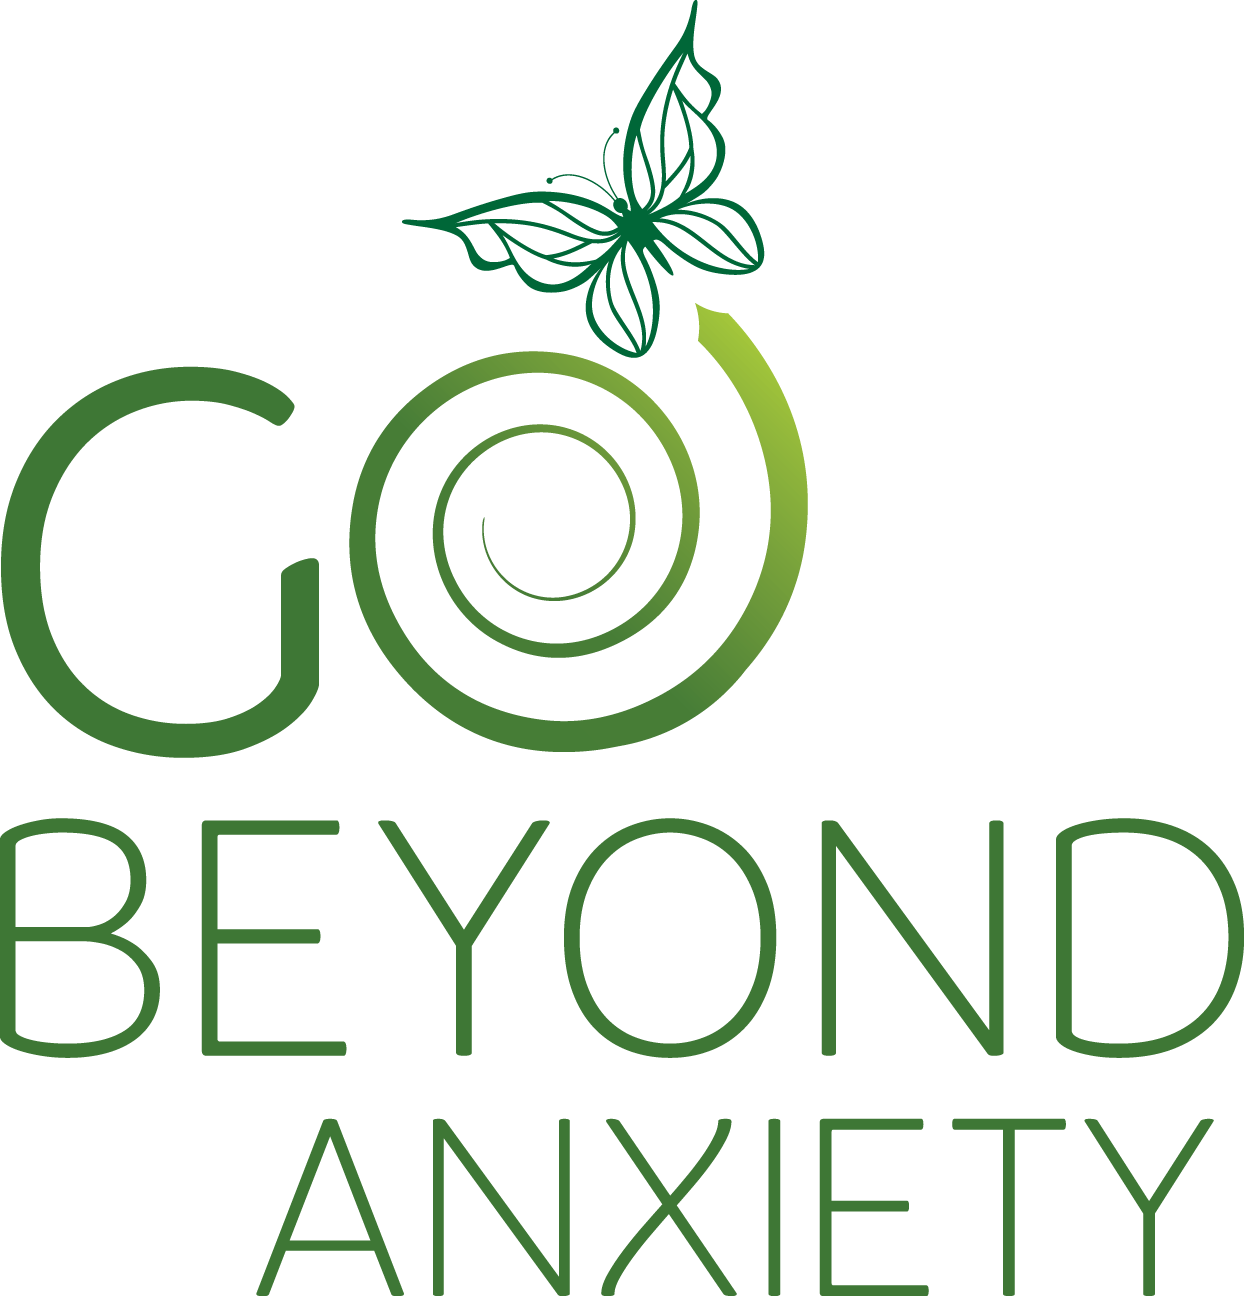 Go Beyond Anxiety